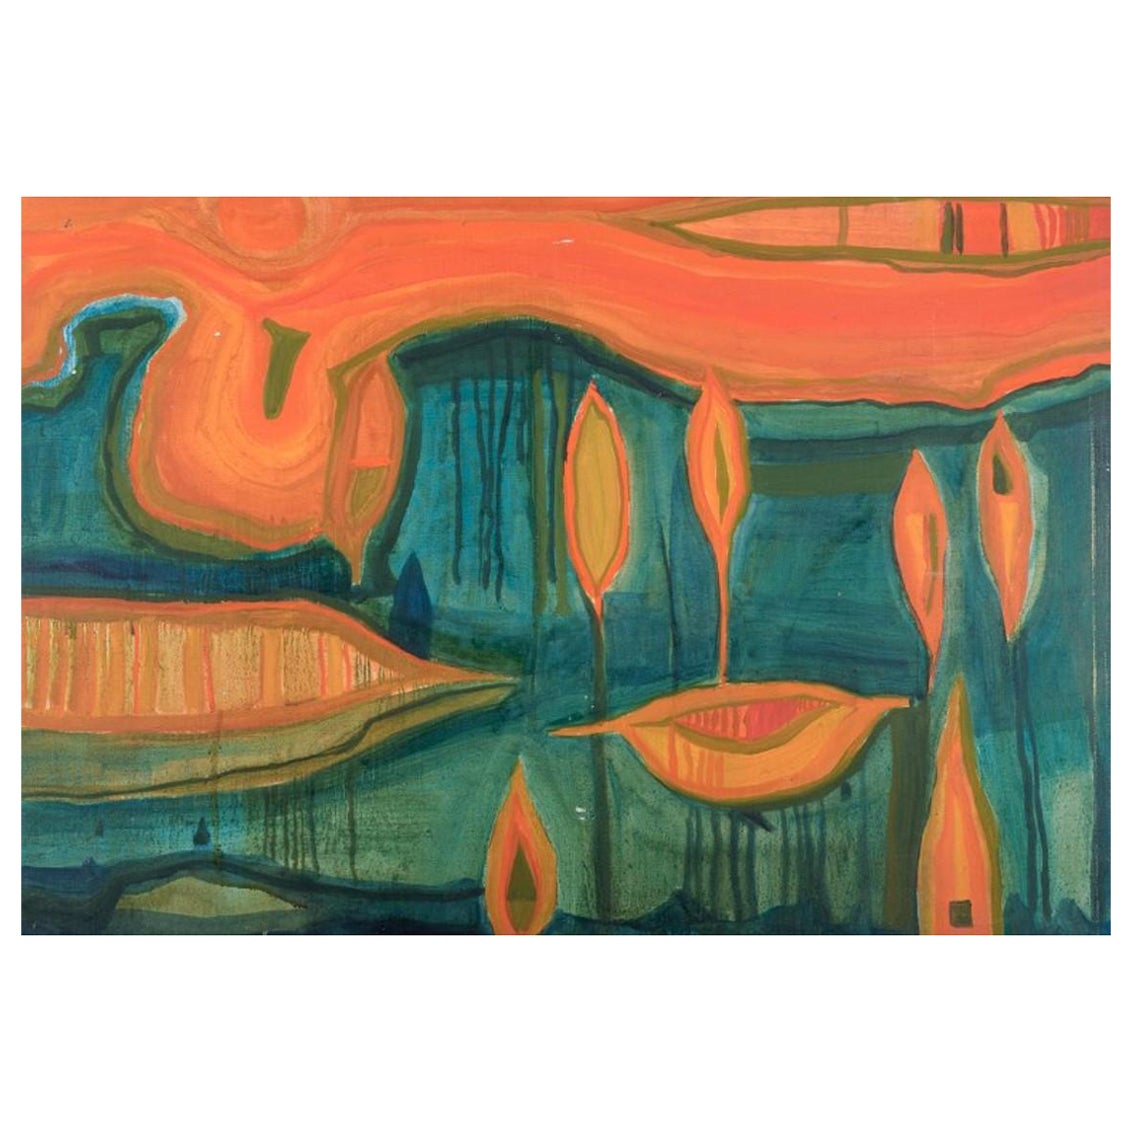 Monique Beucher. Oil on canvas. Abstract composition in orange and green